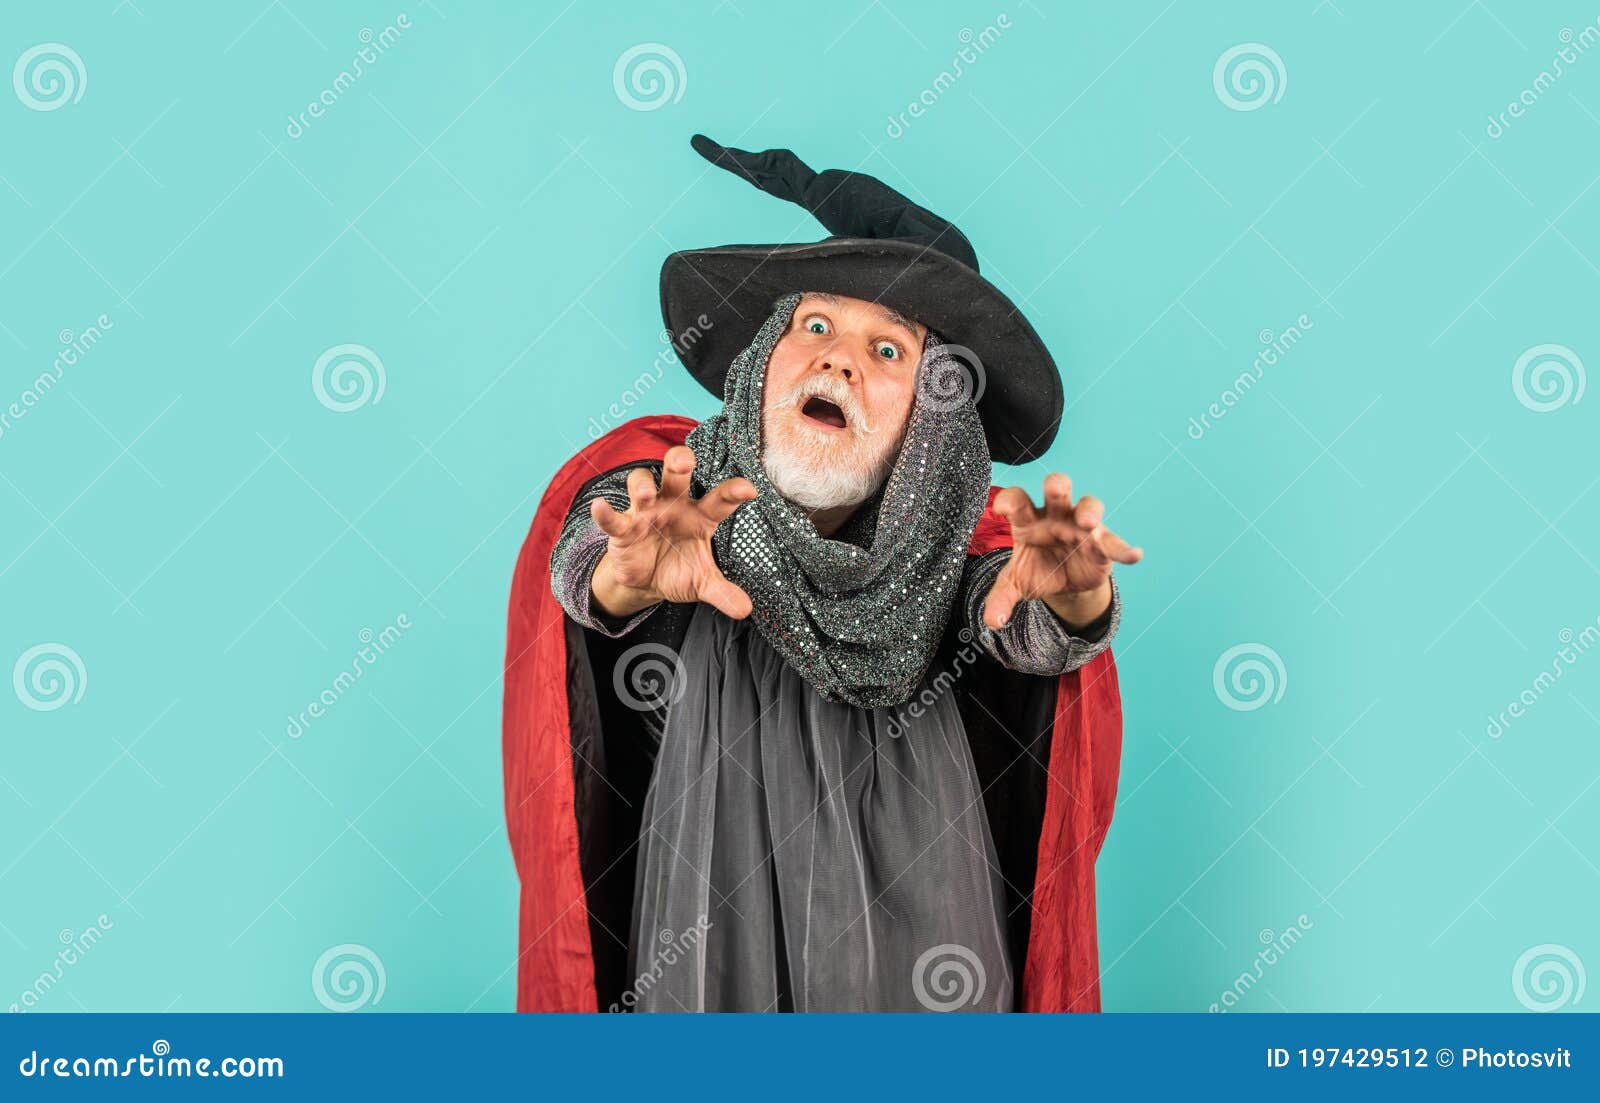 scary-zombie-man-gothic-man-halloween-costume-magic-concept-experienced-wise-wizard-costume-hat-halloween-scary-zombie-man-197429512.jpg